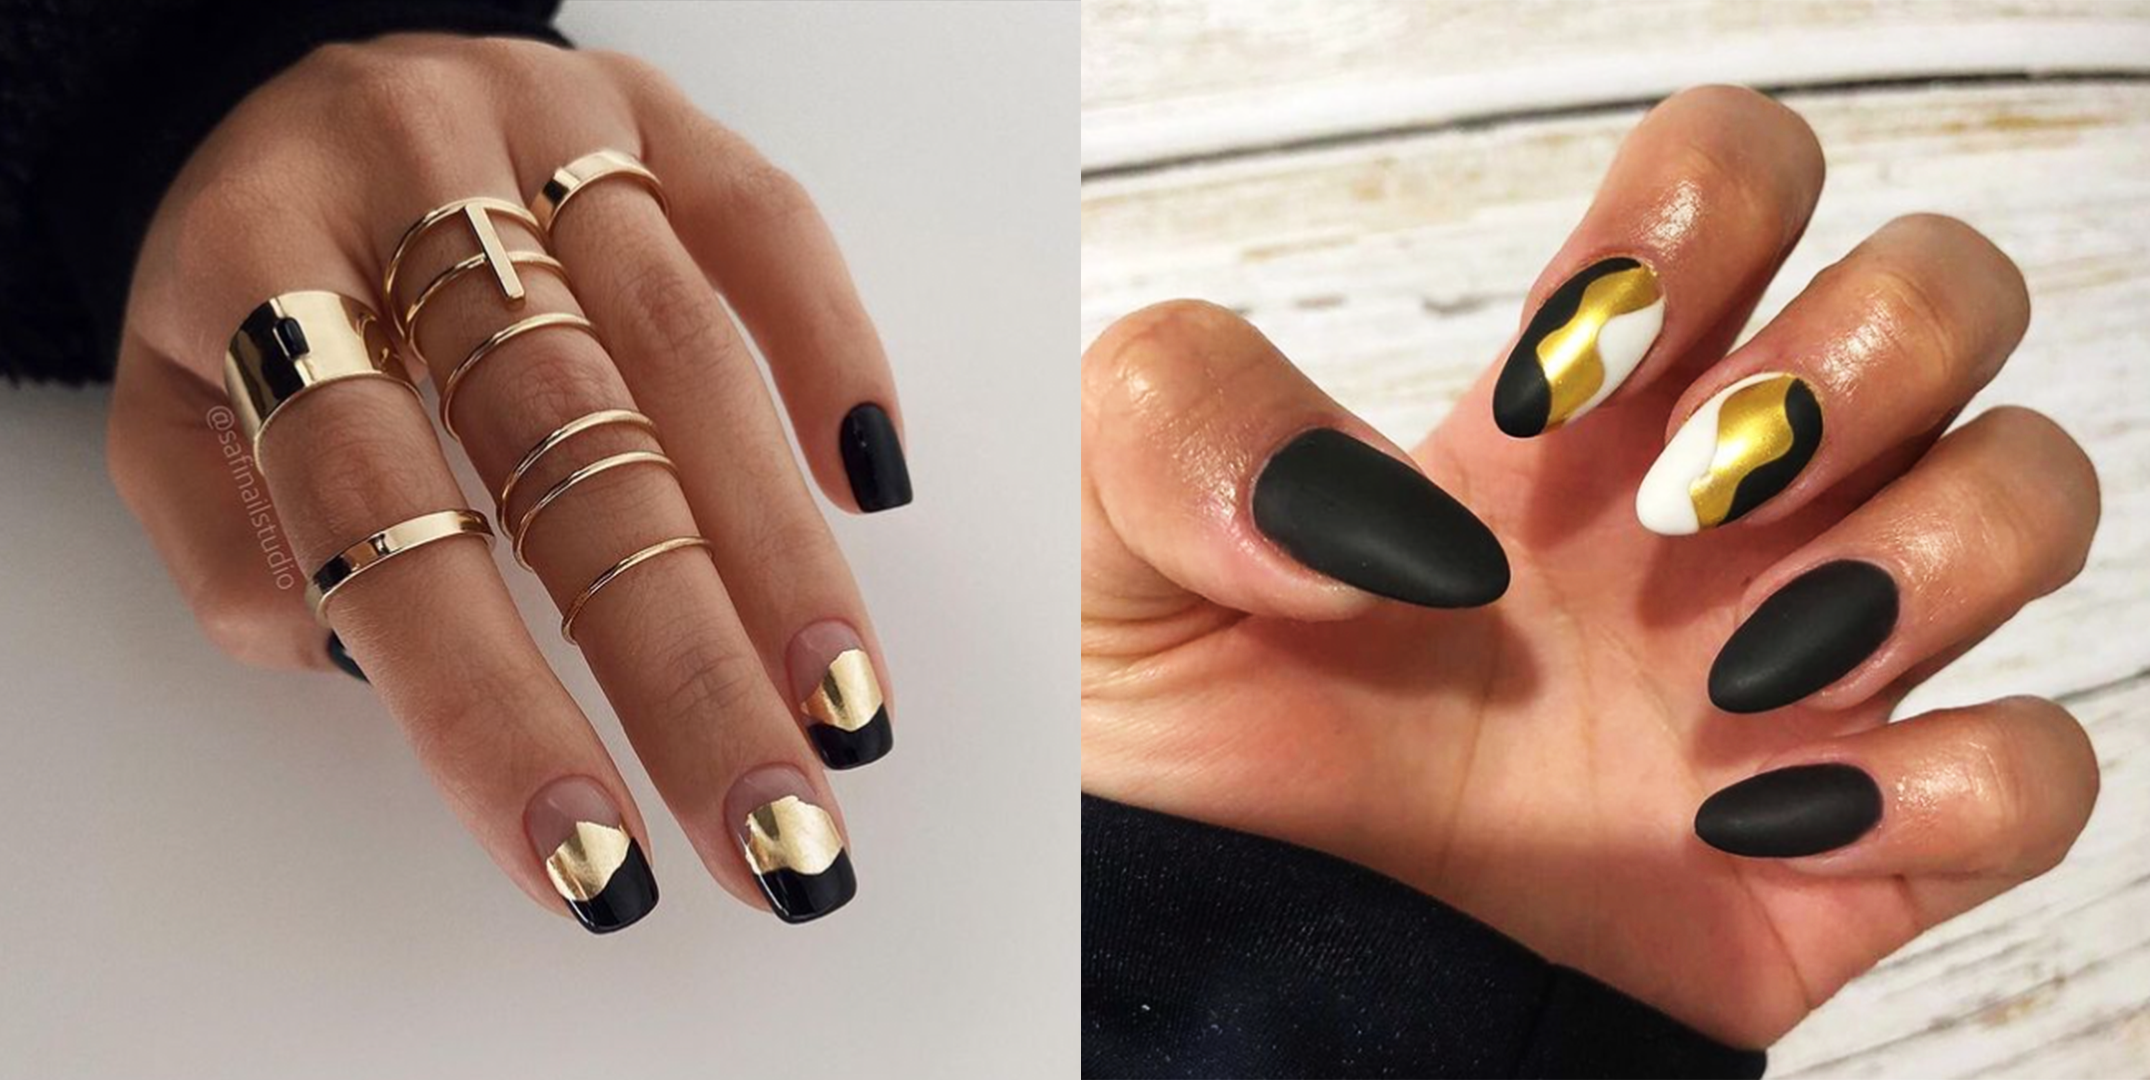 Textured Nail Art Is the Maximalist Response to Glazed Nails